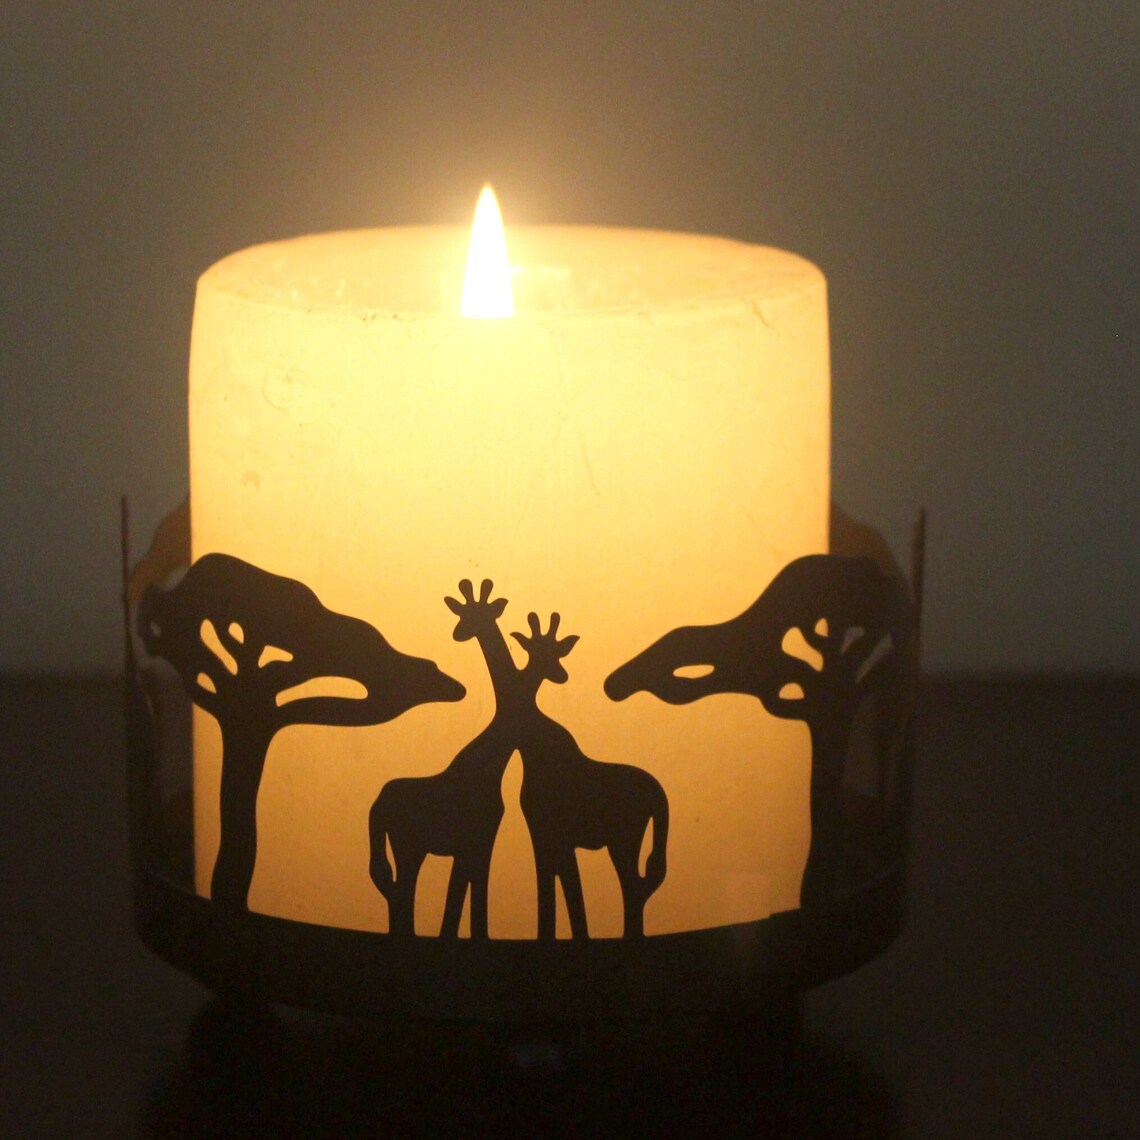 Handmade Giraffe Candle Holder - Flexi Africa - Flexi Africa offers Free Delivery Worldwide - Vibrant African traditional clothing showcasing bold prints and intricate designs